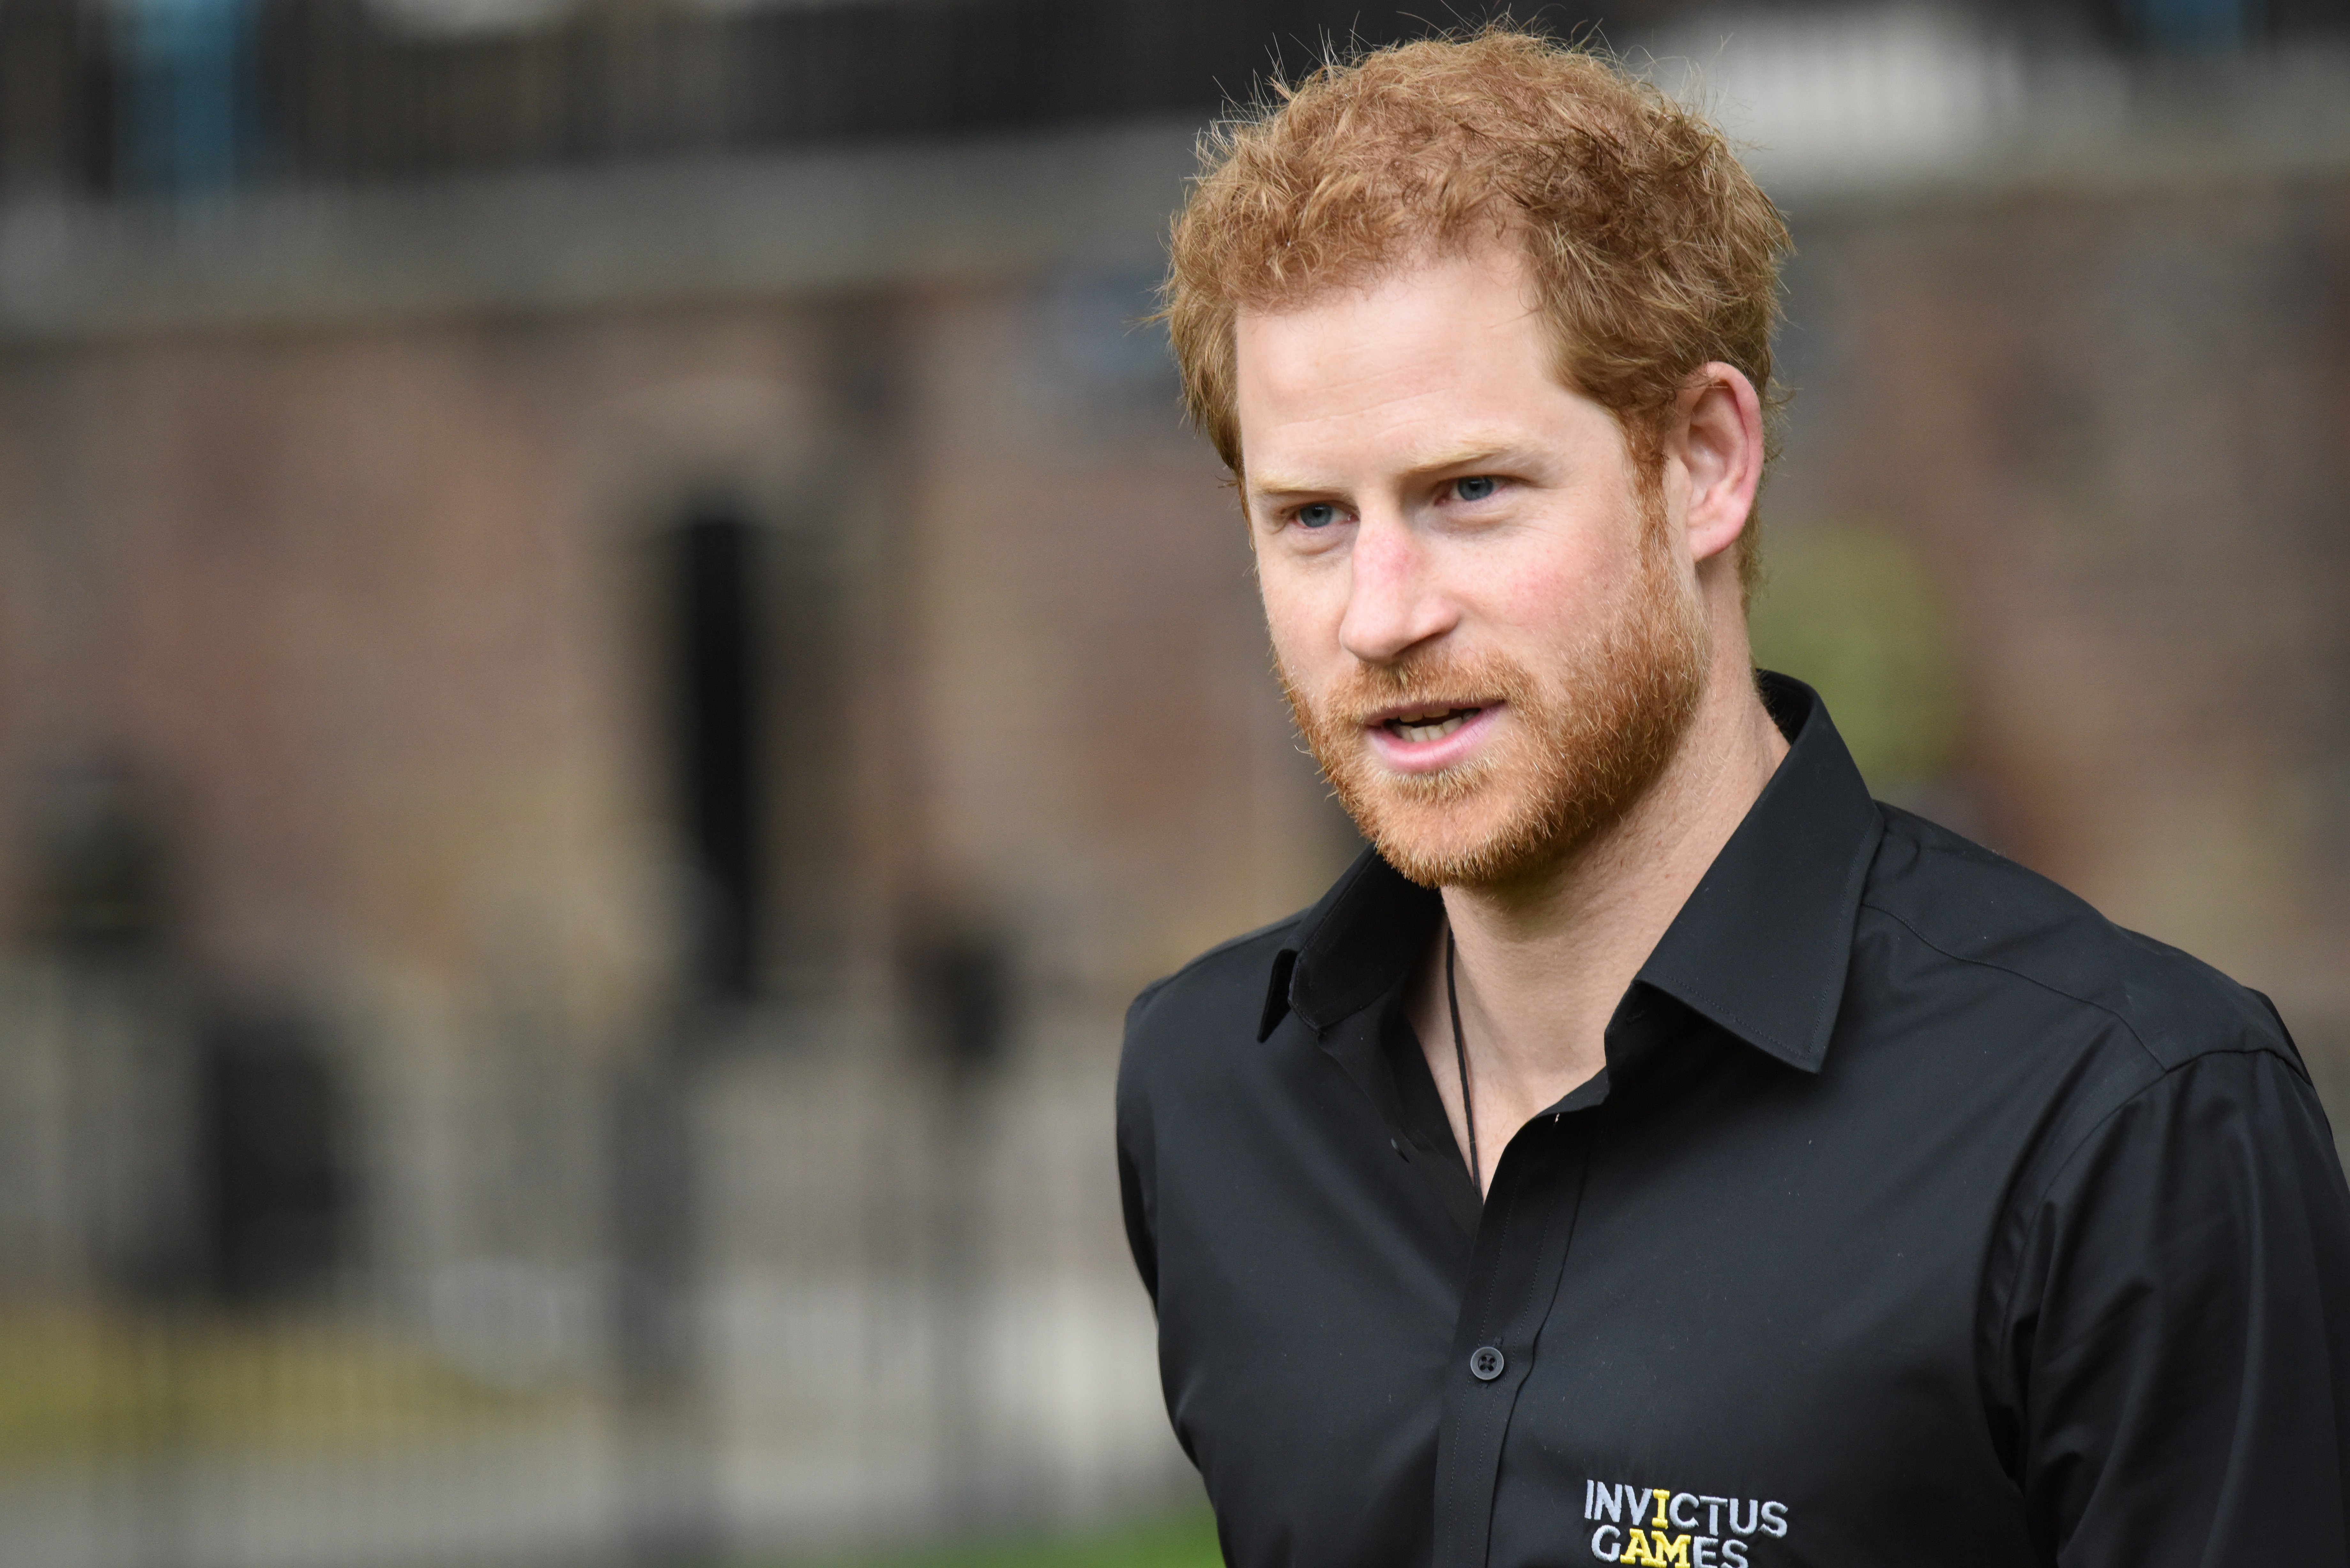 Prince Harry, Patron of the Invictus Games Foundation, attends the launch of the team selected to represent the UK at the Invictus Games Toronto on May 2017 in London, United Kingdom | Photo: Shutterstock